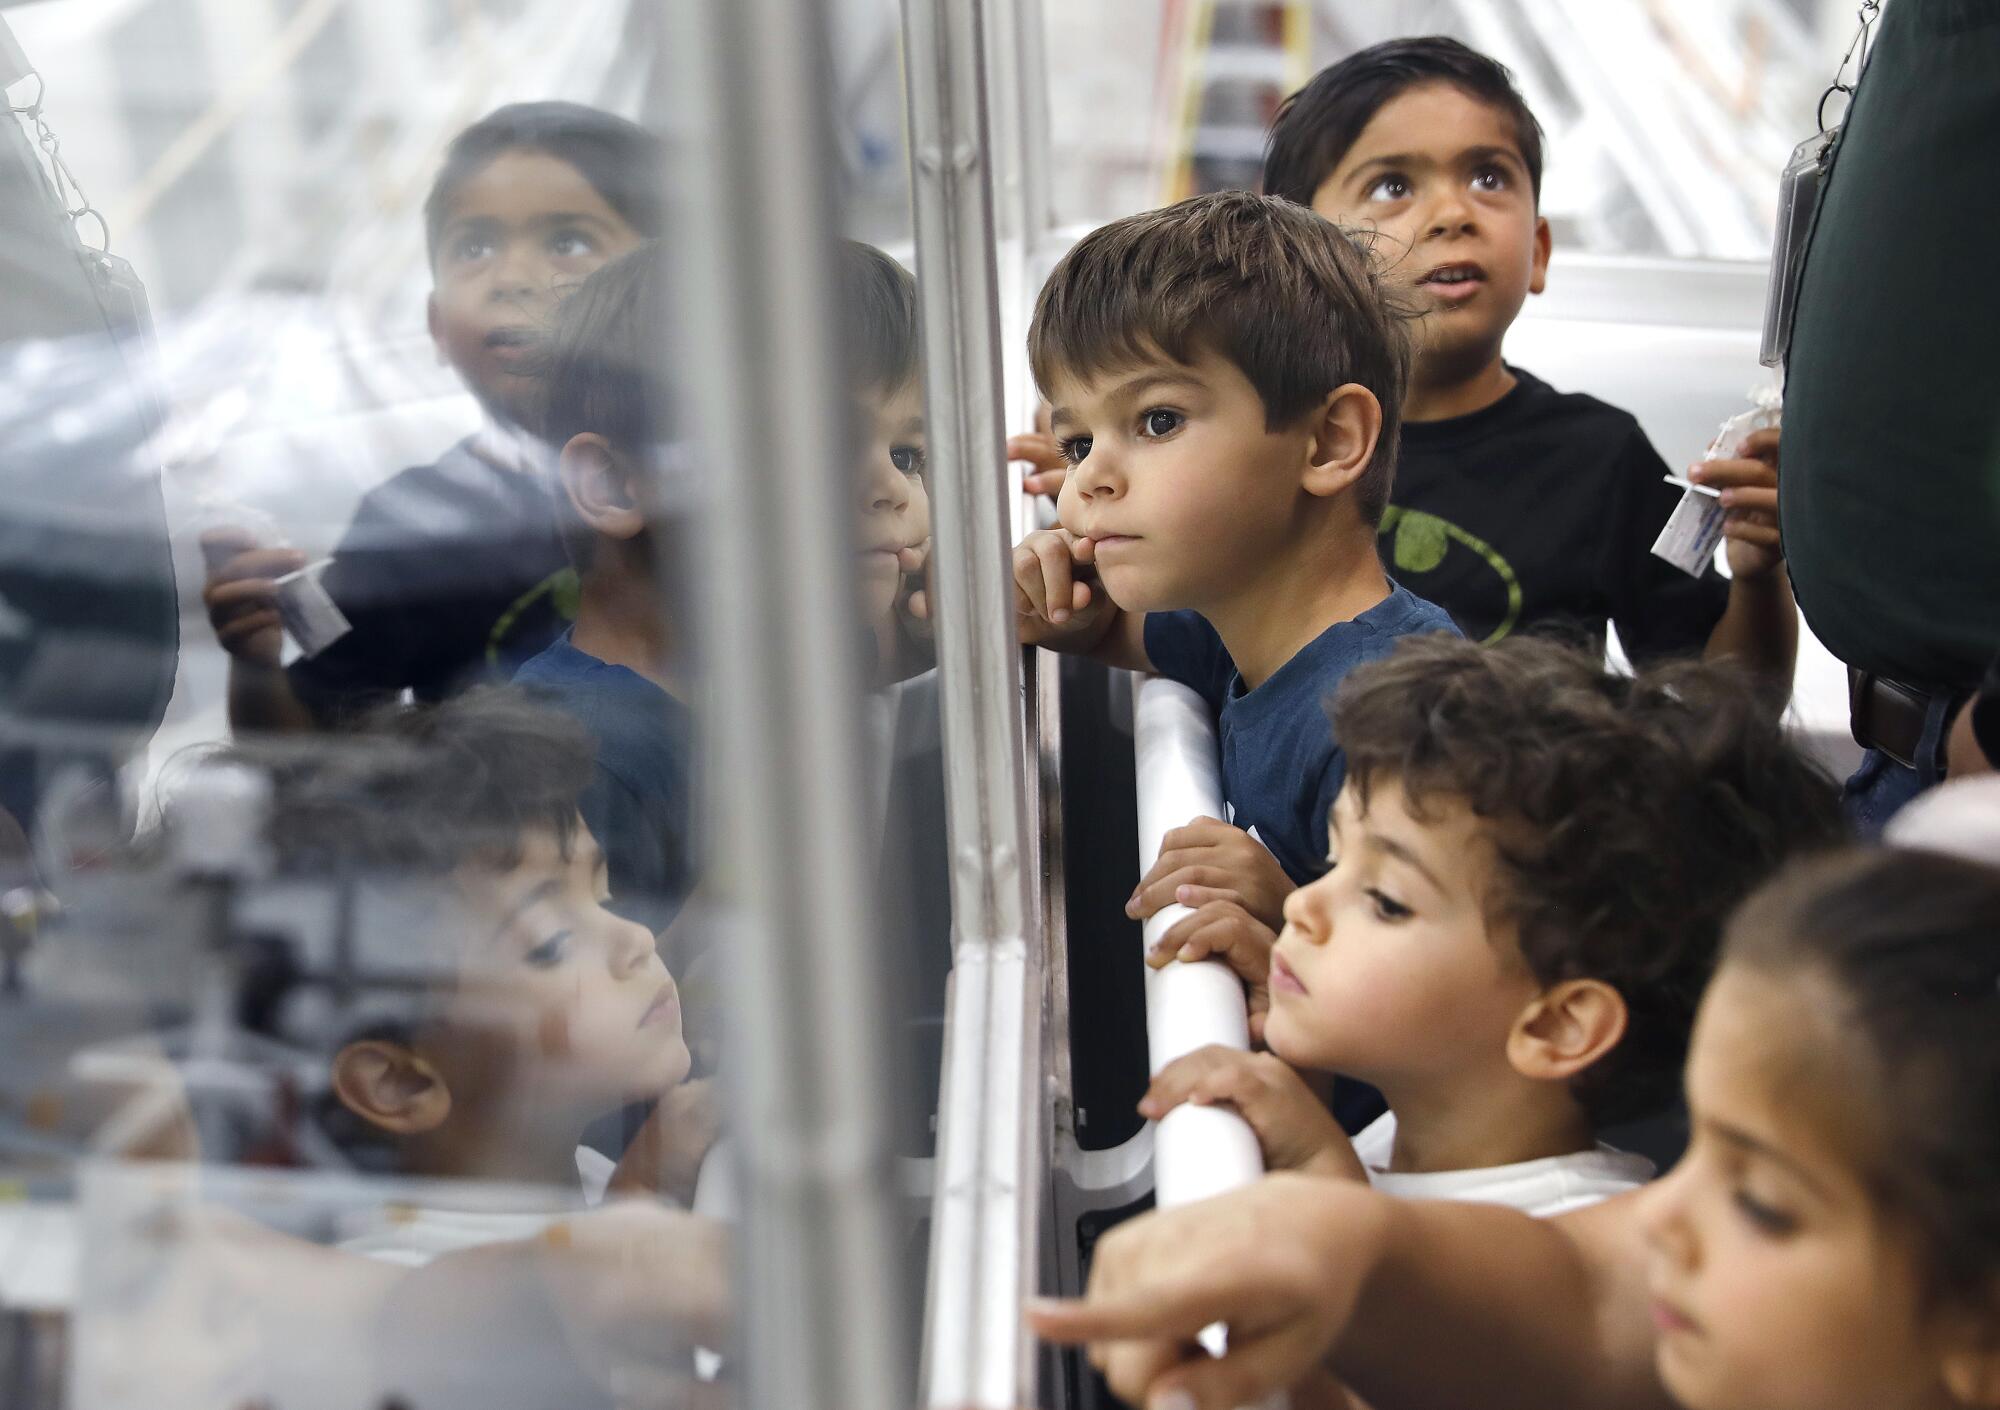 Children look through a window into the clean room where JPL where the Europa Clipper spacecraft is assembled.